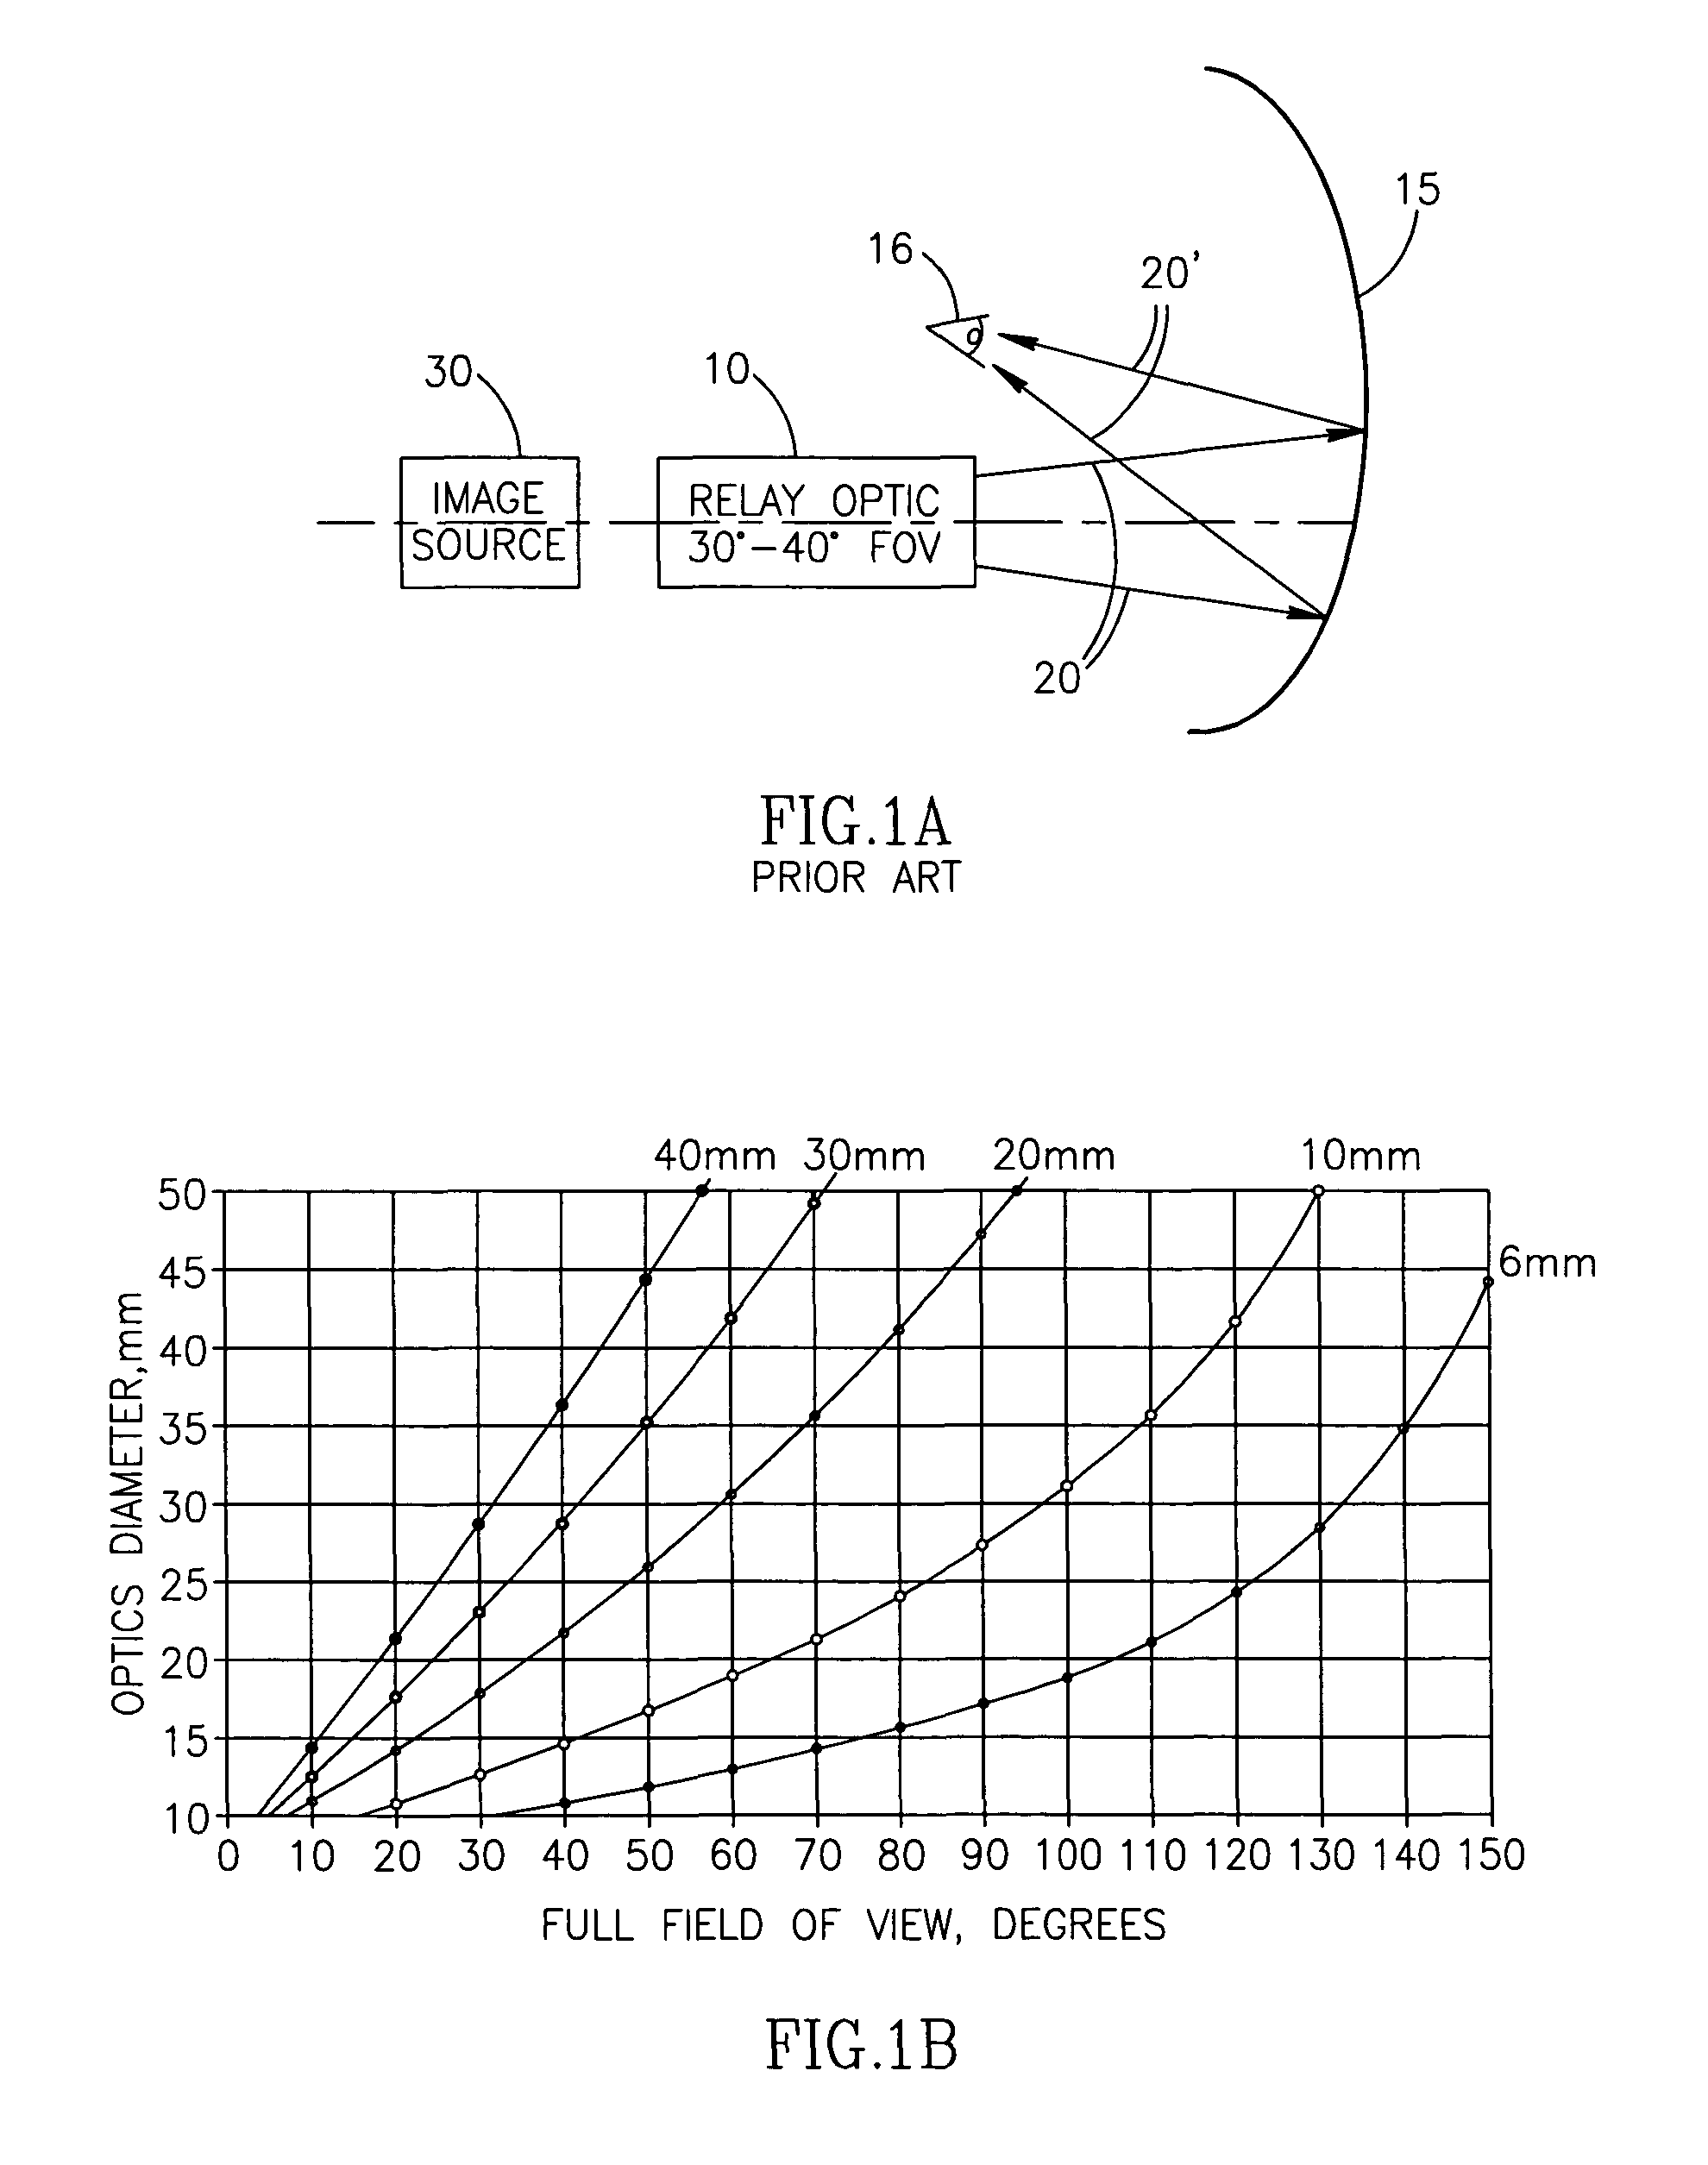 Personal display system with extended field of view